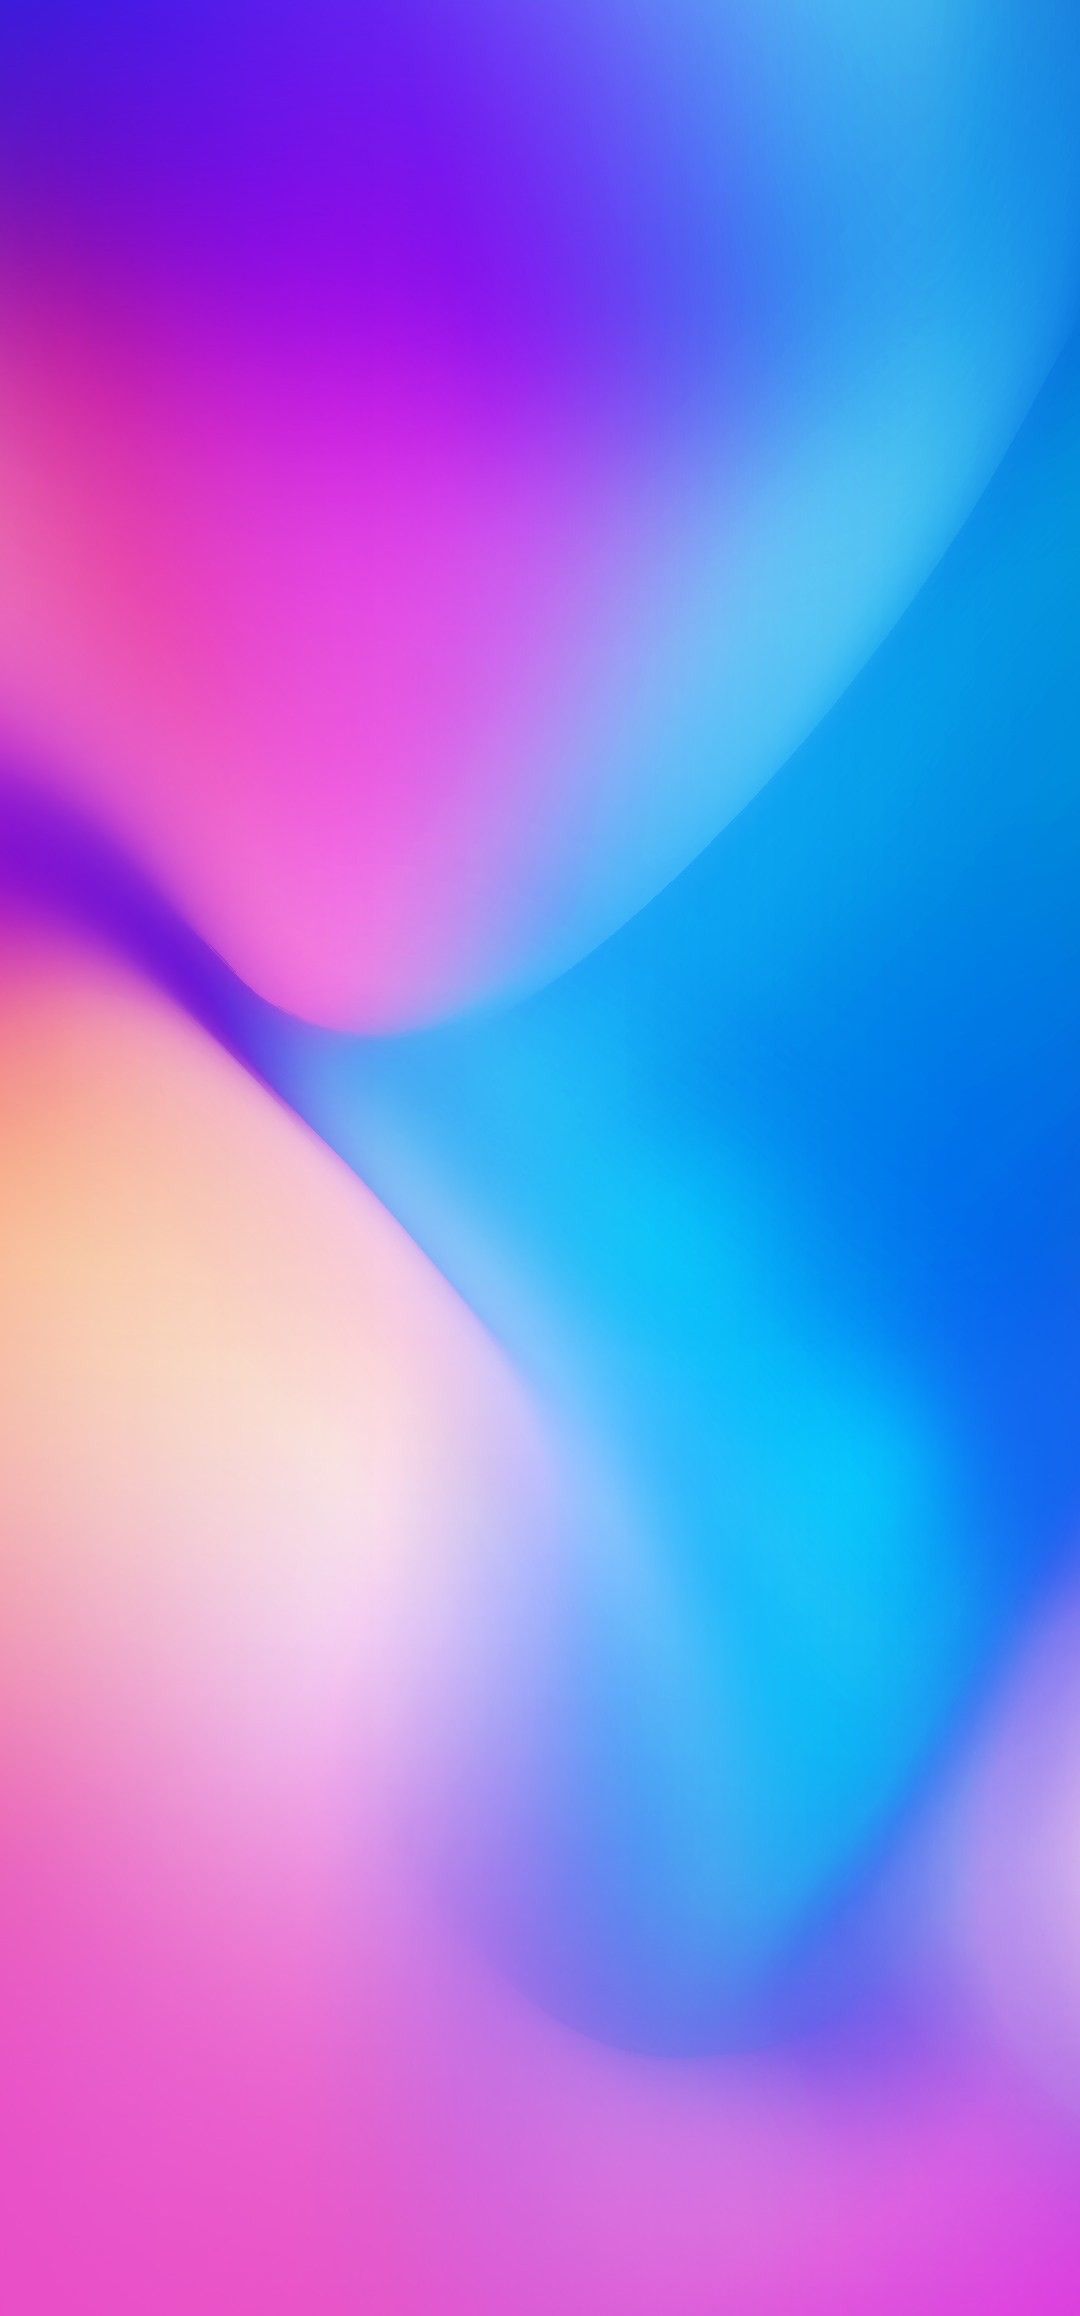 These Wallpaper Can Be Used On Any Android Or Ios Nex Wallpaper HD